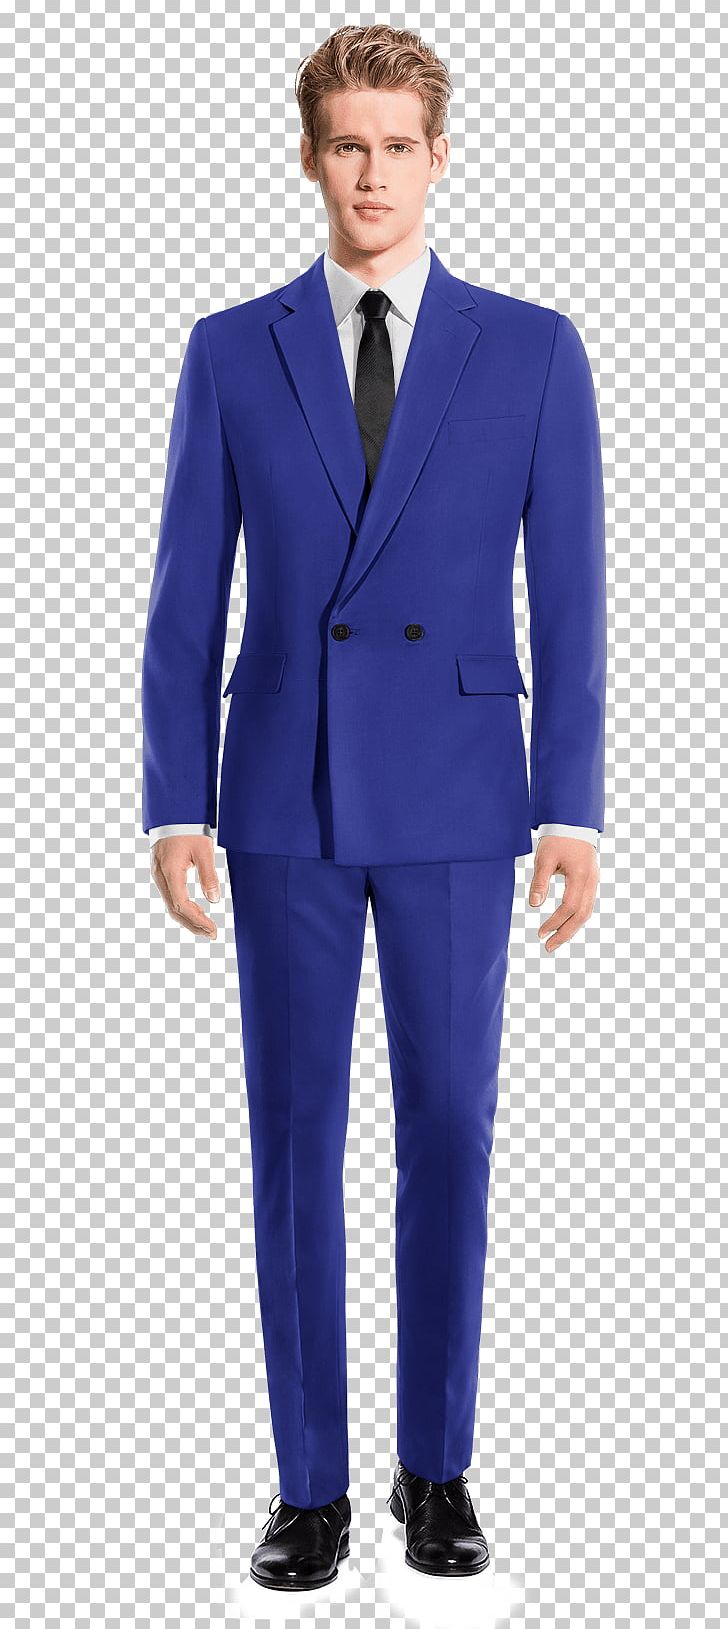 Suit Pants Jacket Blue Lapel Pin PNG, Clipart, Blazer, Blue, Businessperson, Chino Cloth, Clothing Free PNG Download